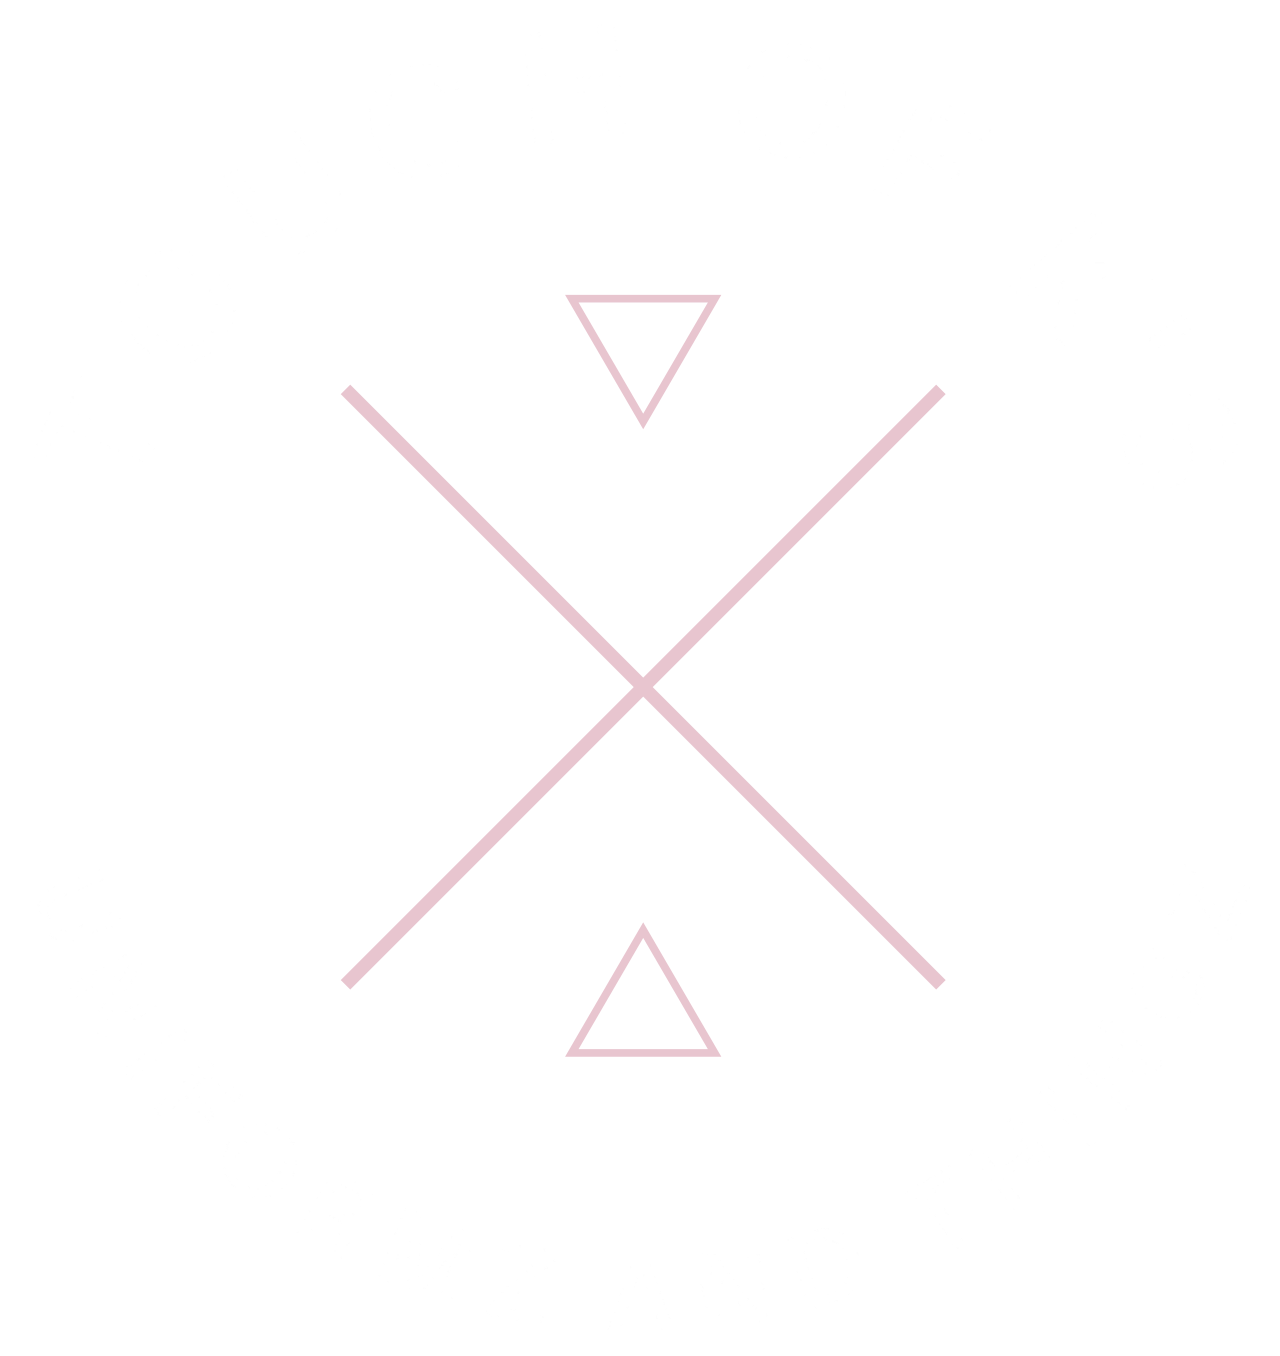 TOUCH OF K'S's web page